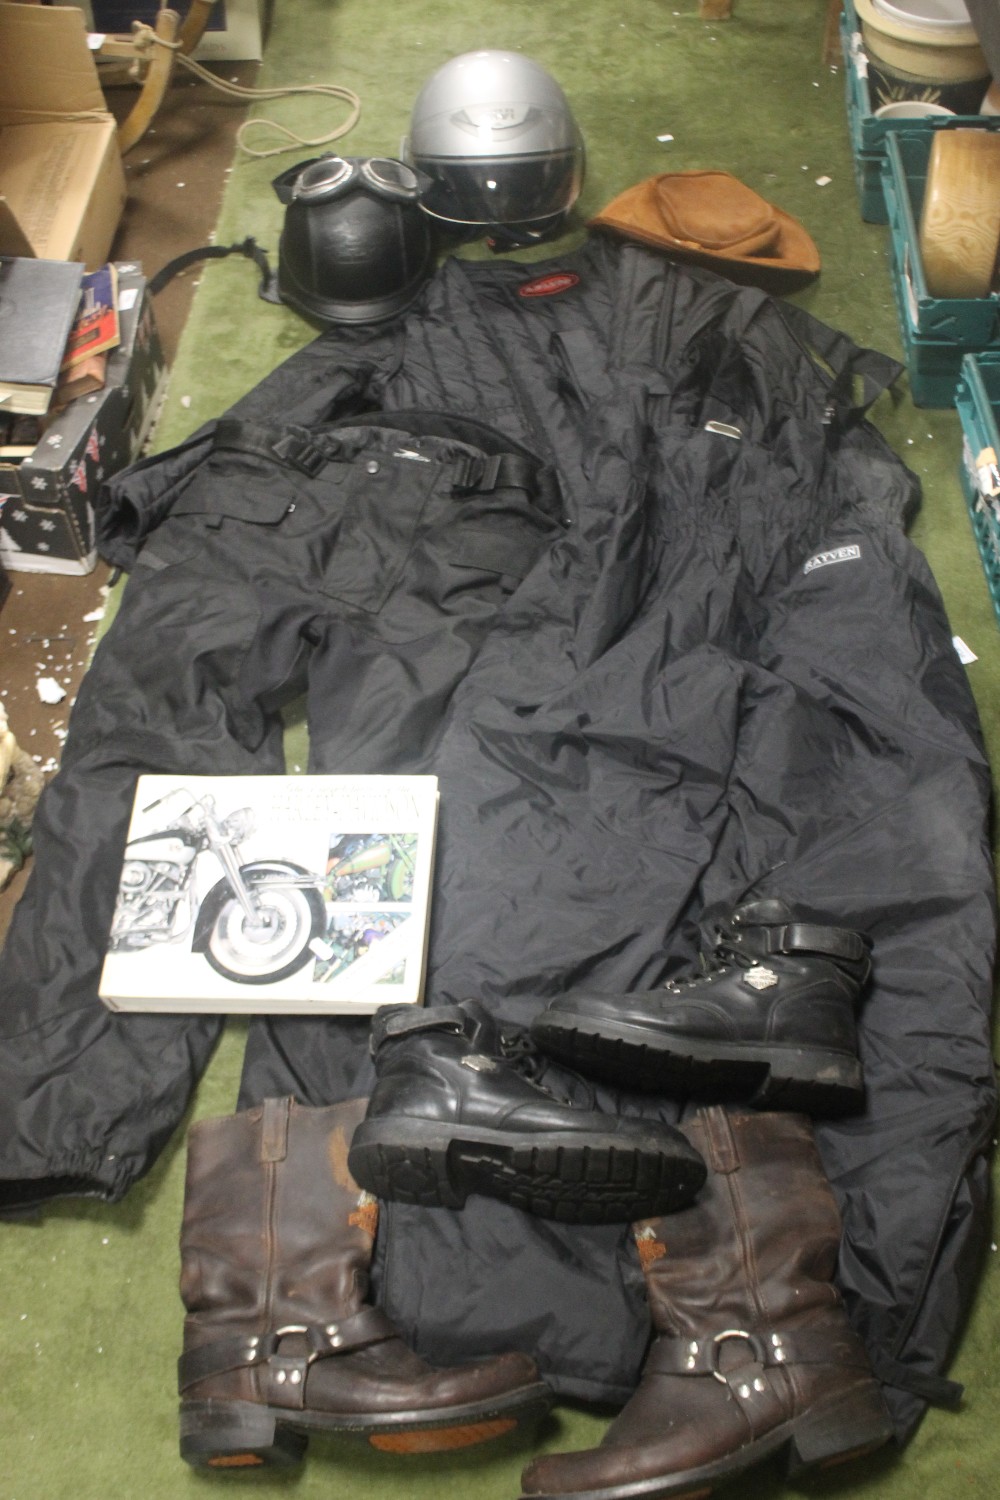 A BOX OF MOTORCYCLE CLOTHING AND HELMETS